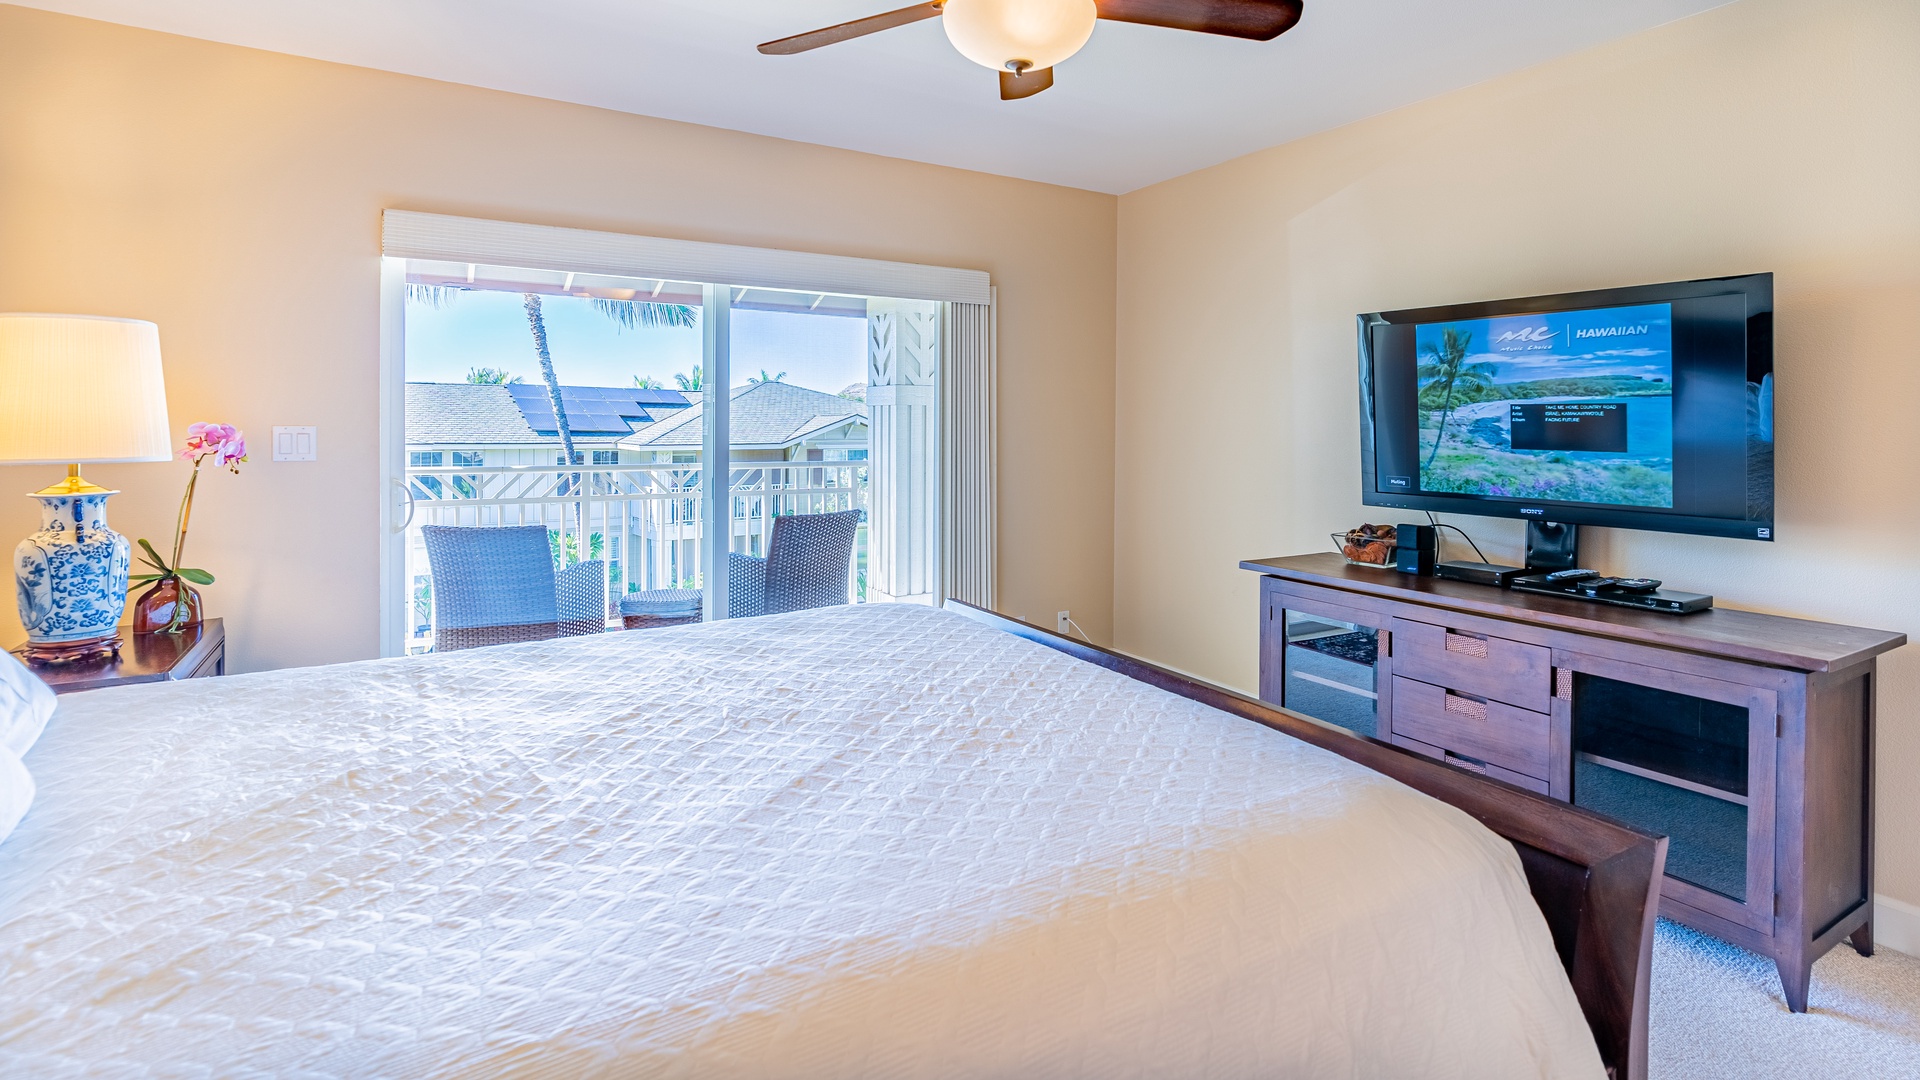 Kapolei Vacation Rentals, Ko Olina Kai 1033C - The primary bedroom with access to the lanai and a TV.